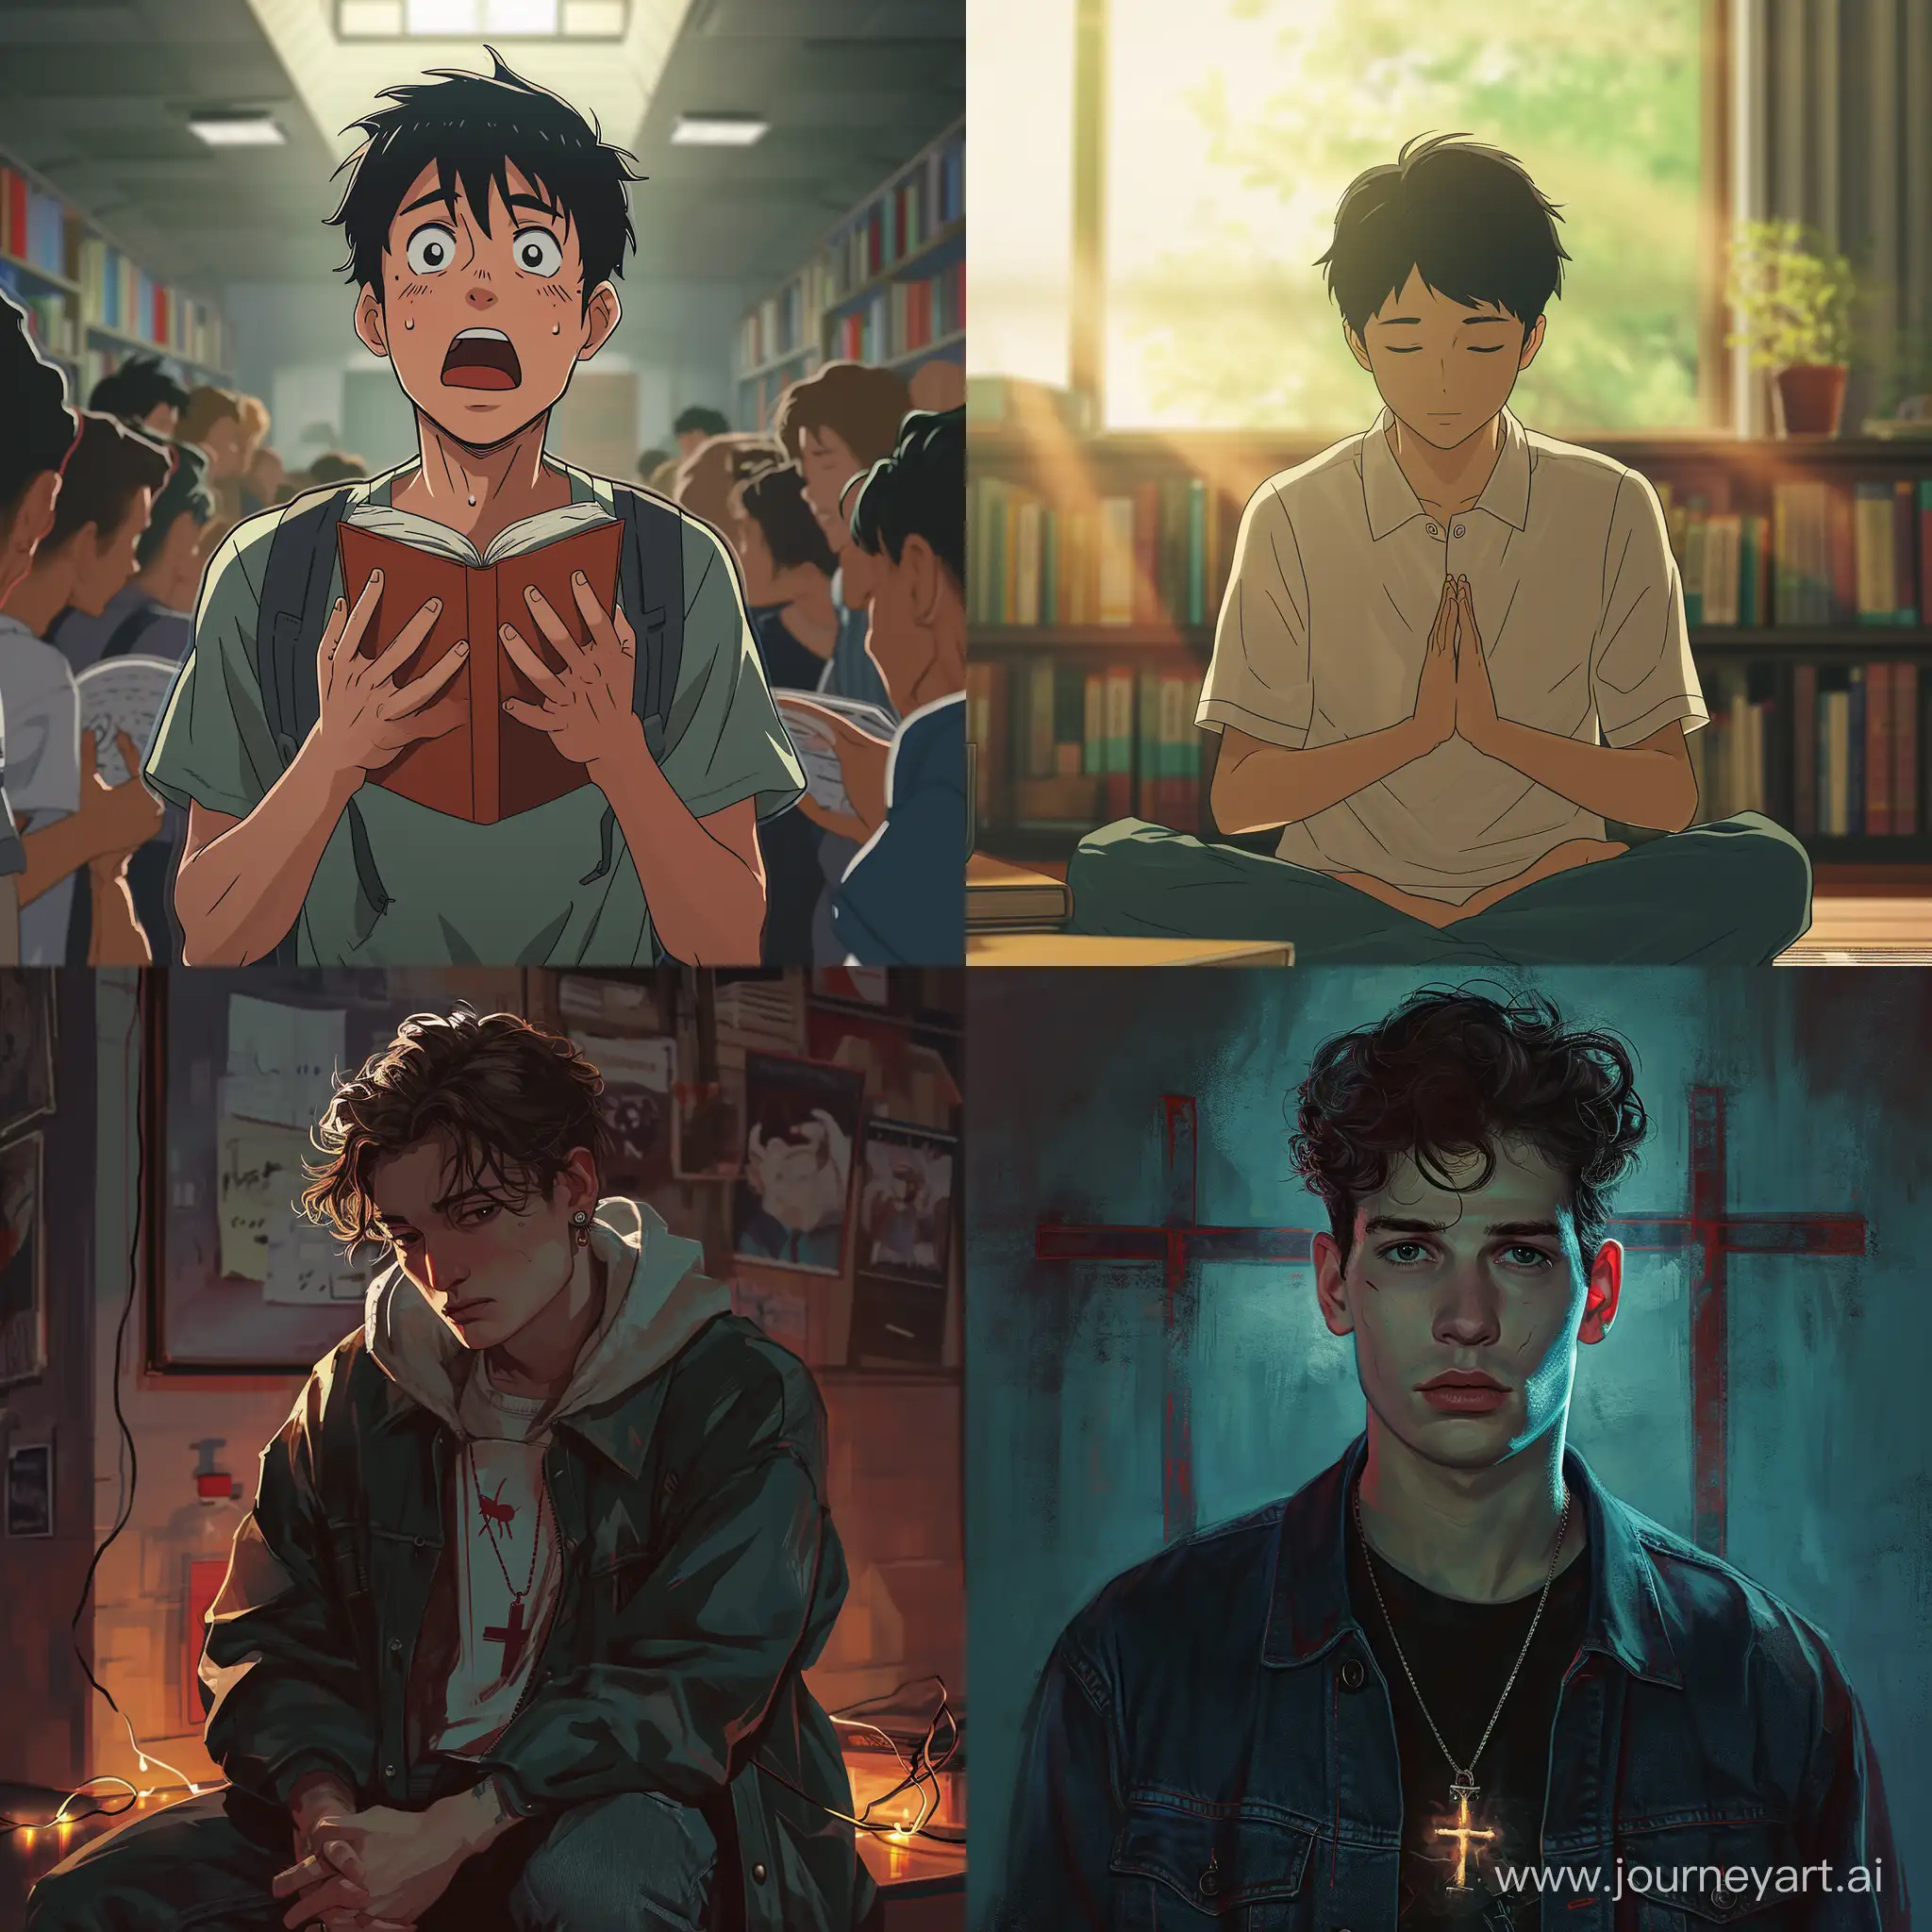 A young university student surrounded by sins in his life tries to get closer to God.